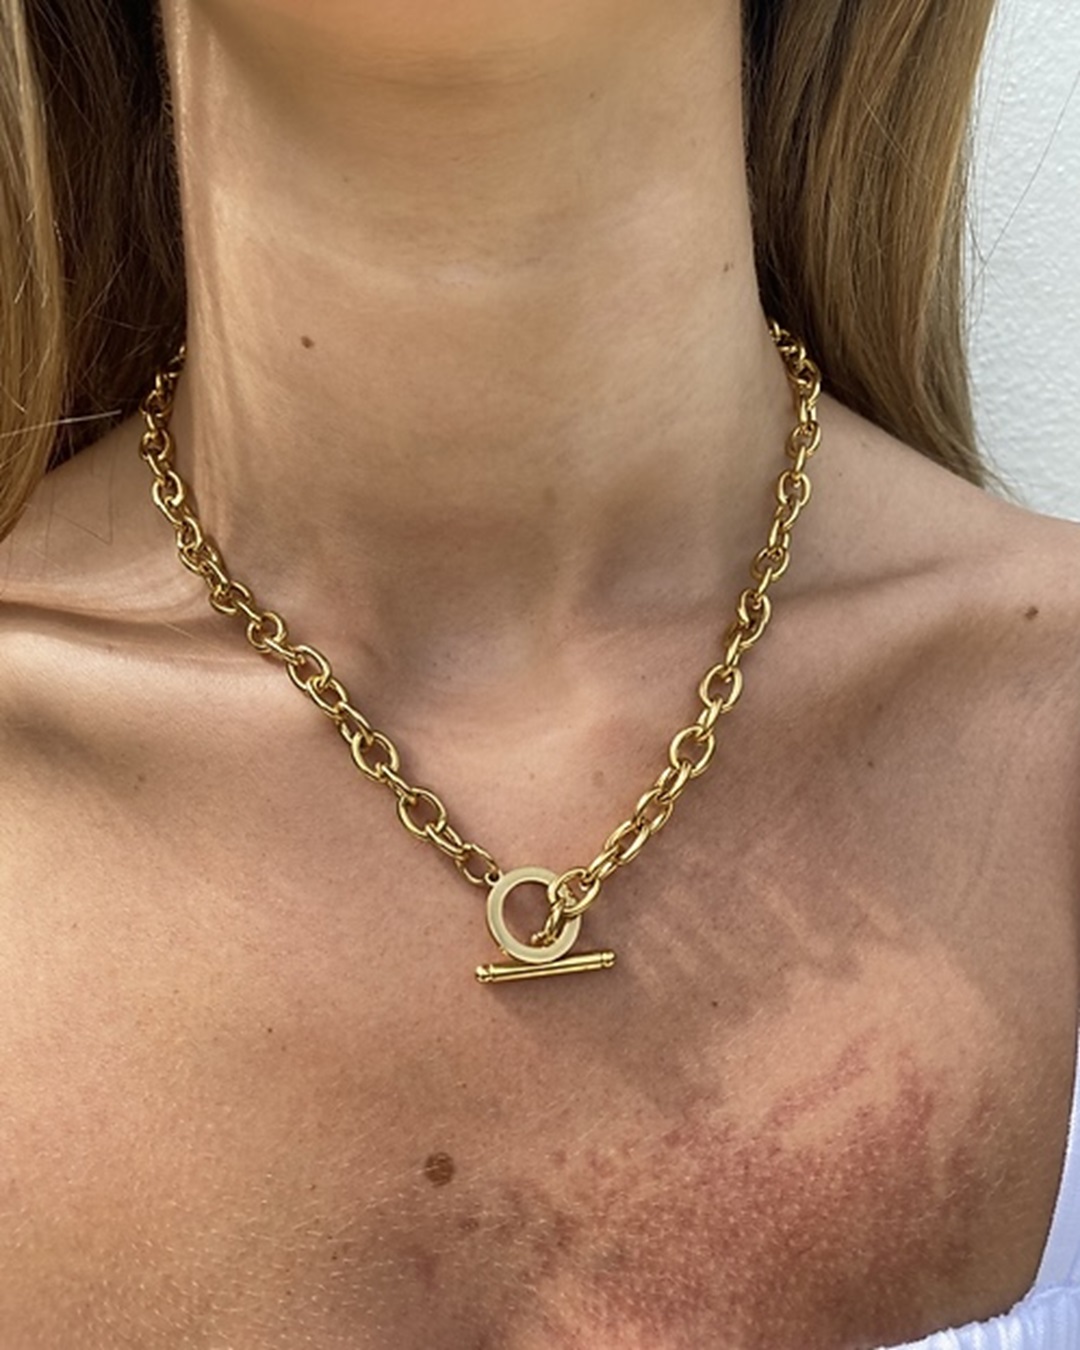 Gold chain necklace on neck